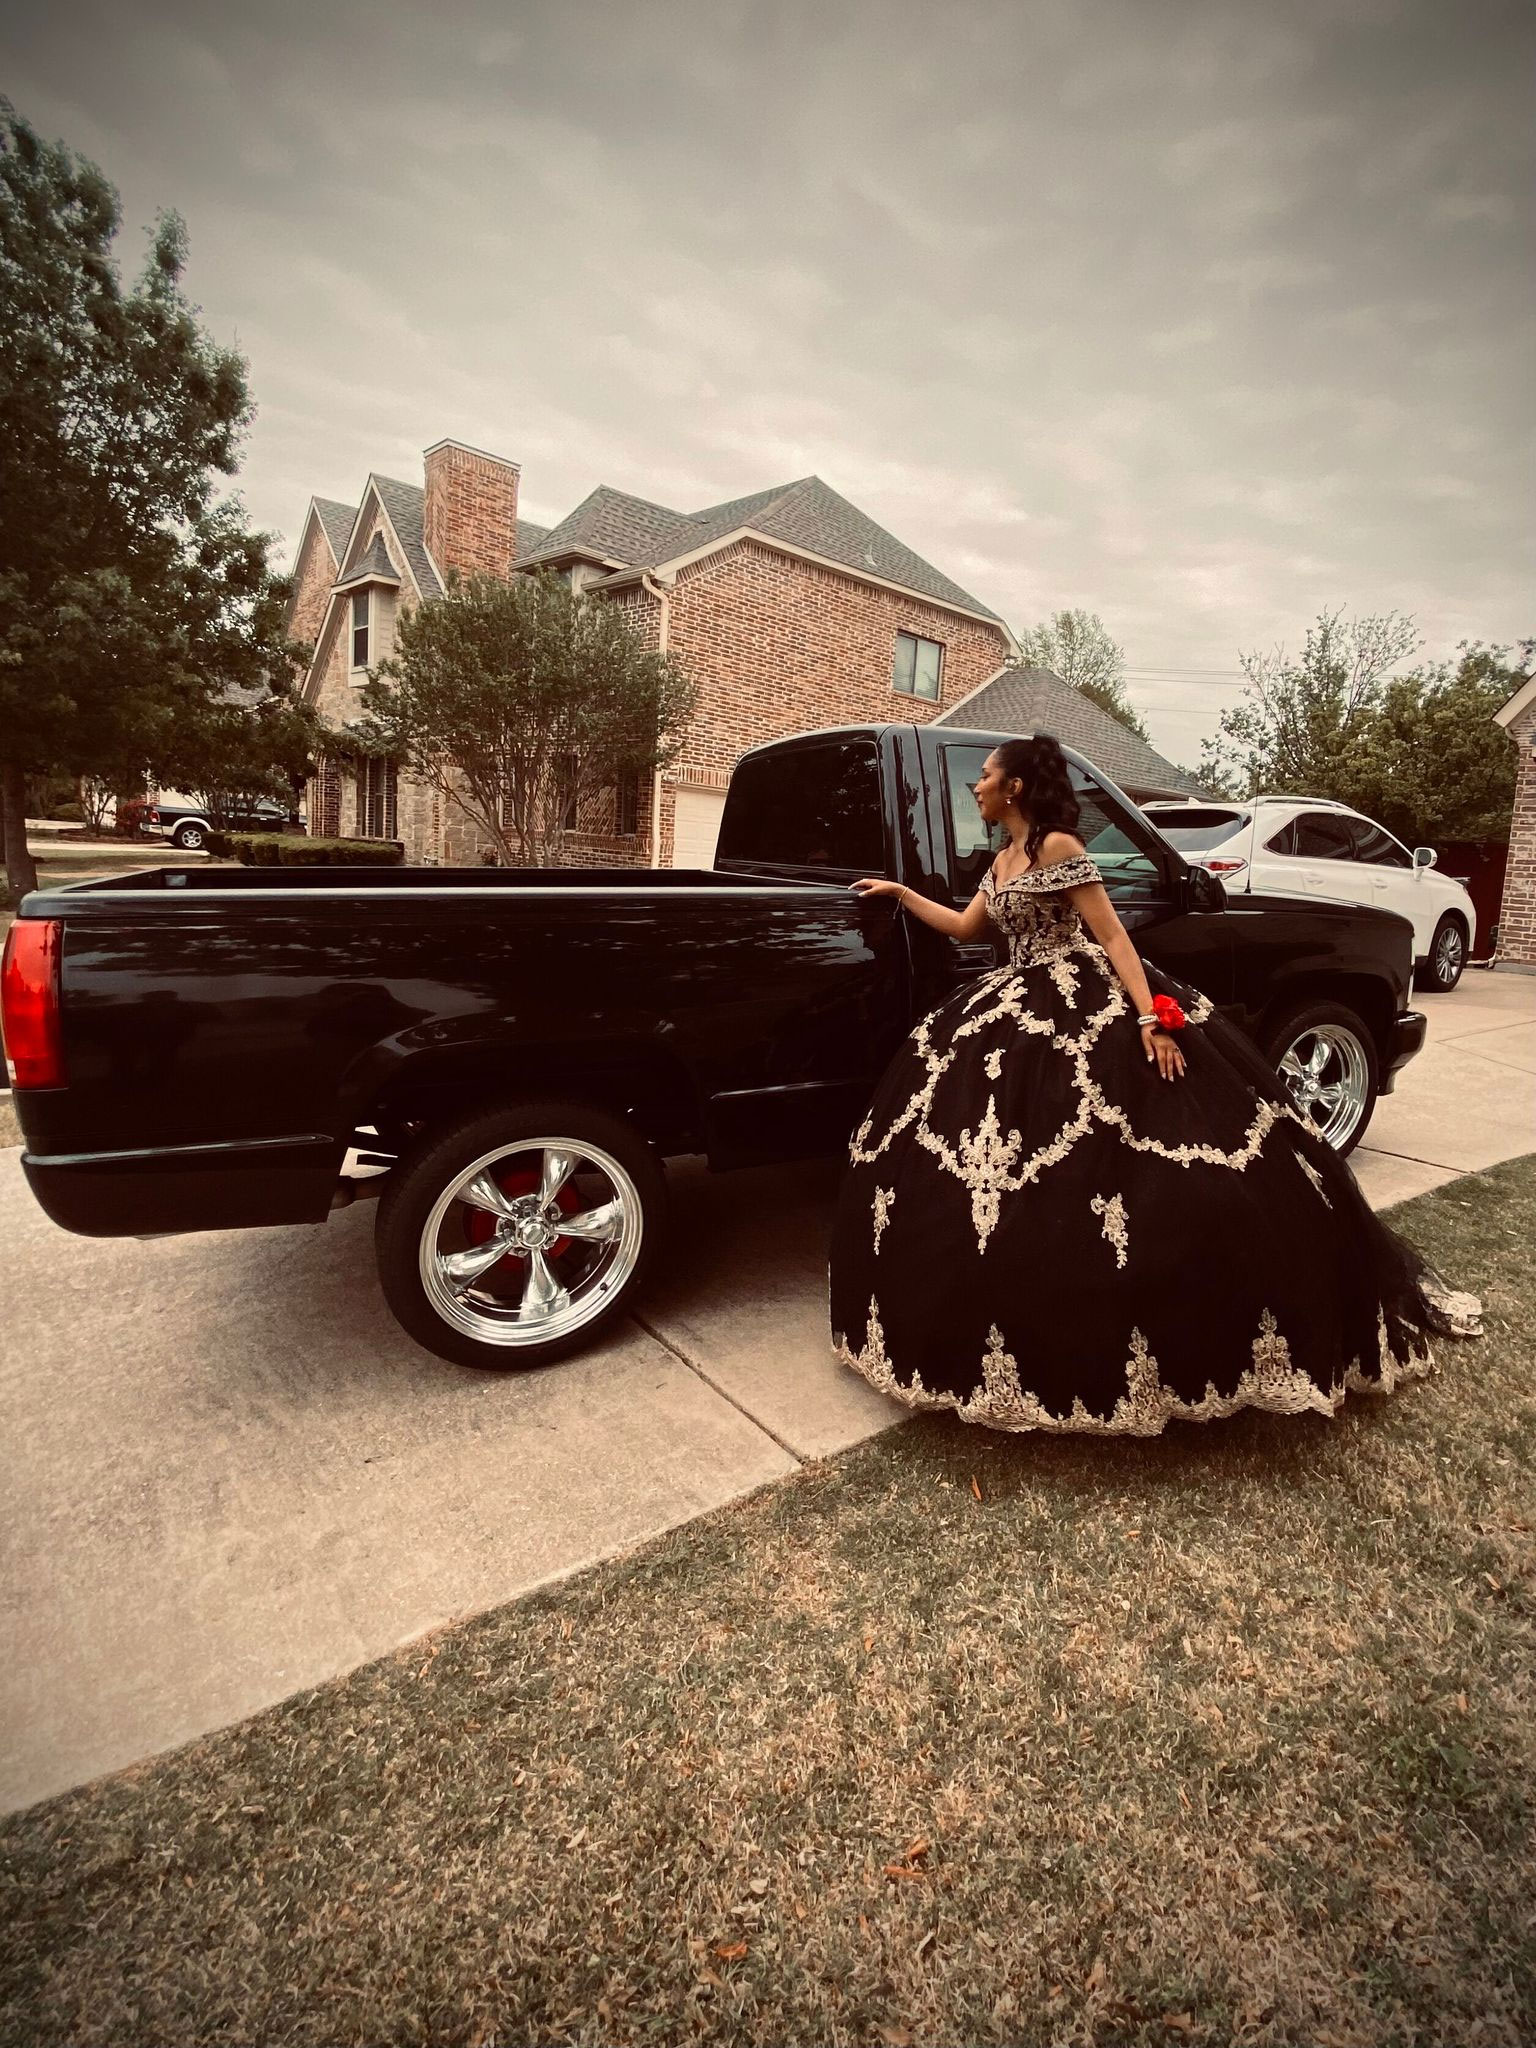 Me being dramatic for my prom and admiring my dad’s truck